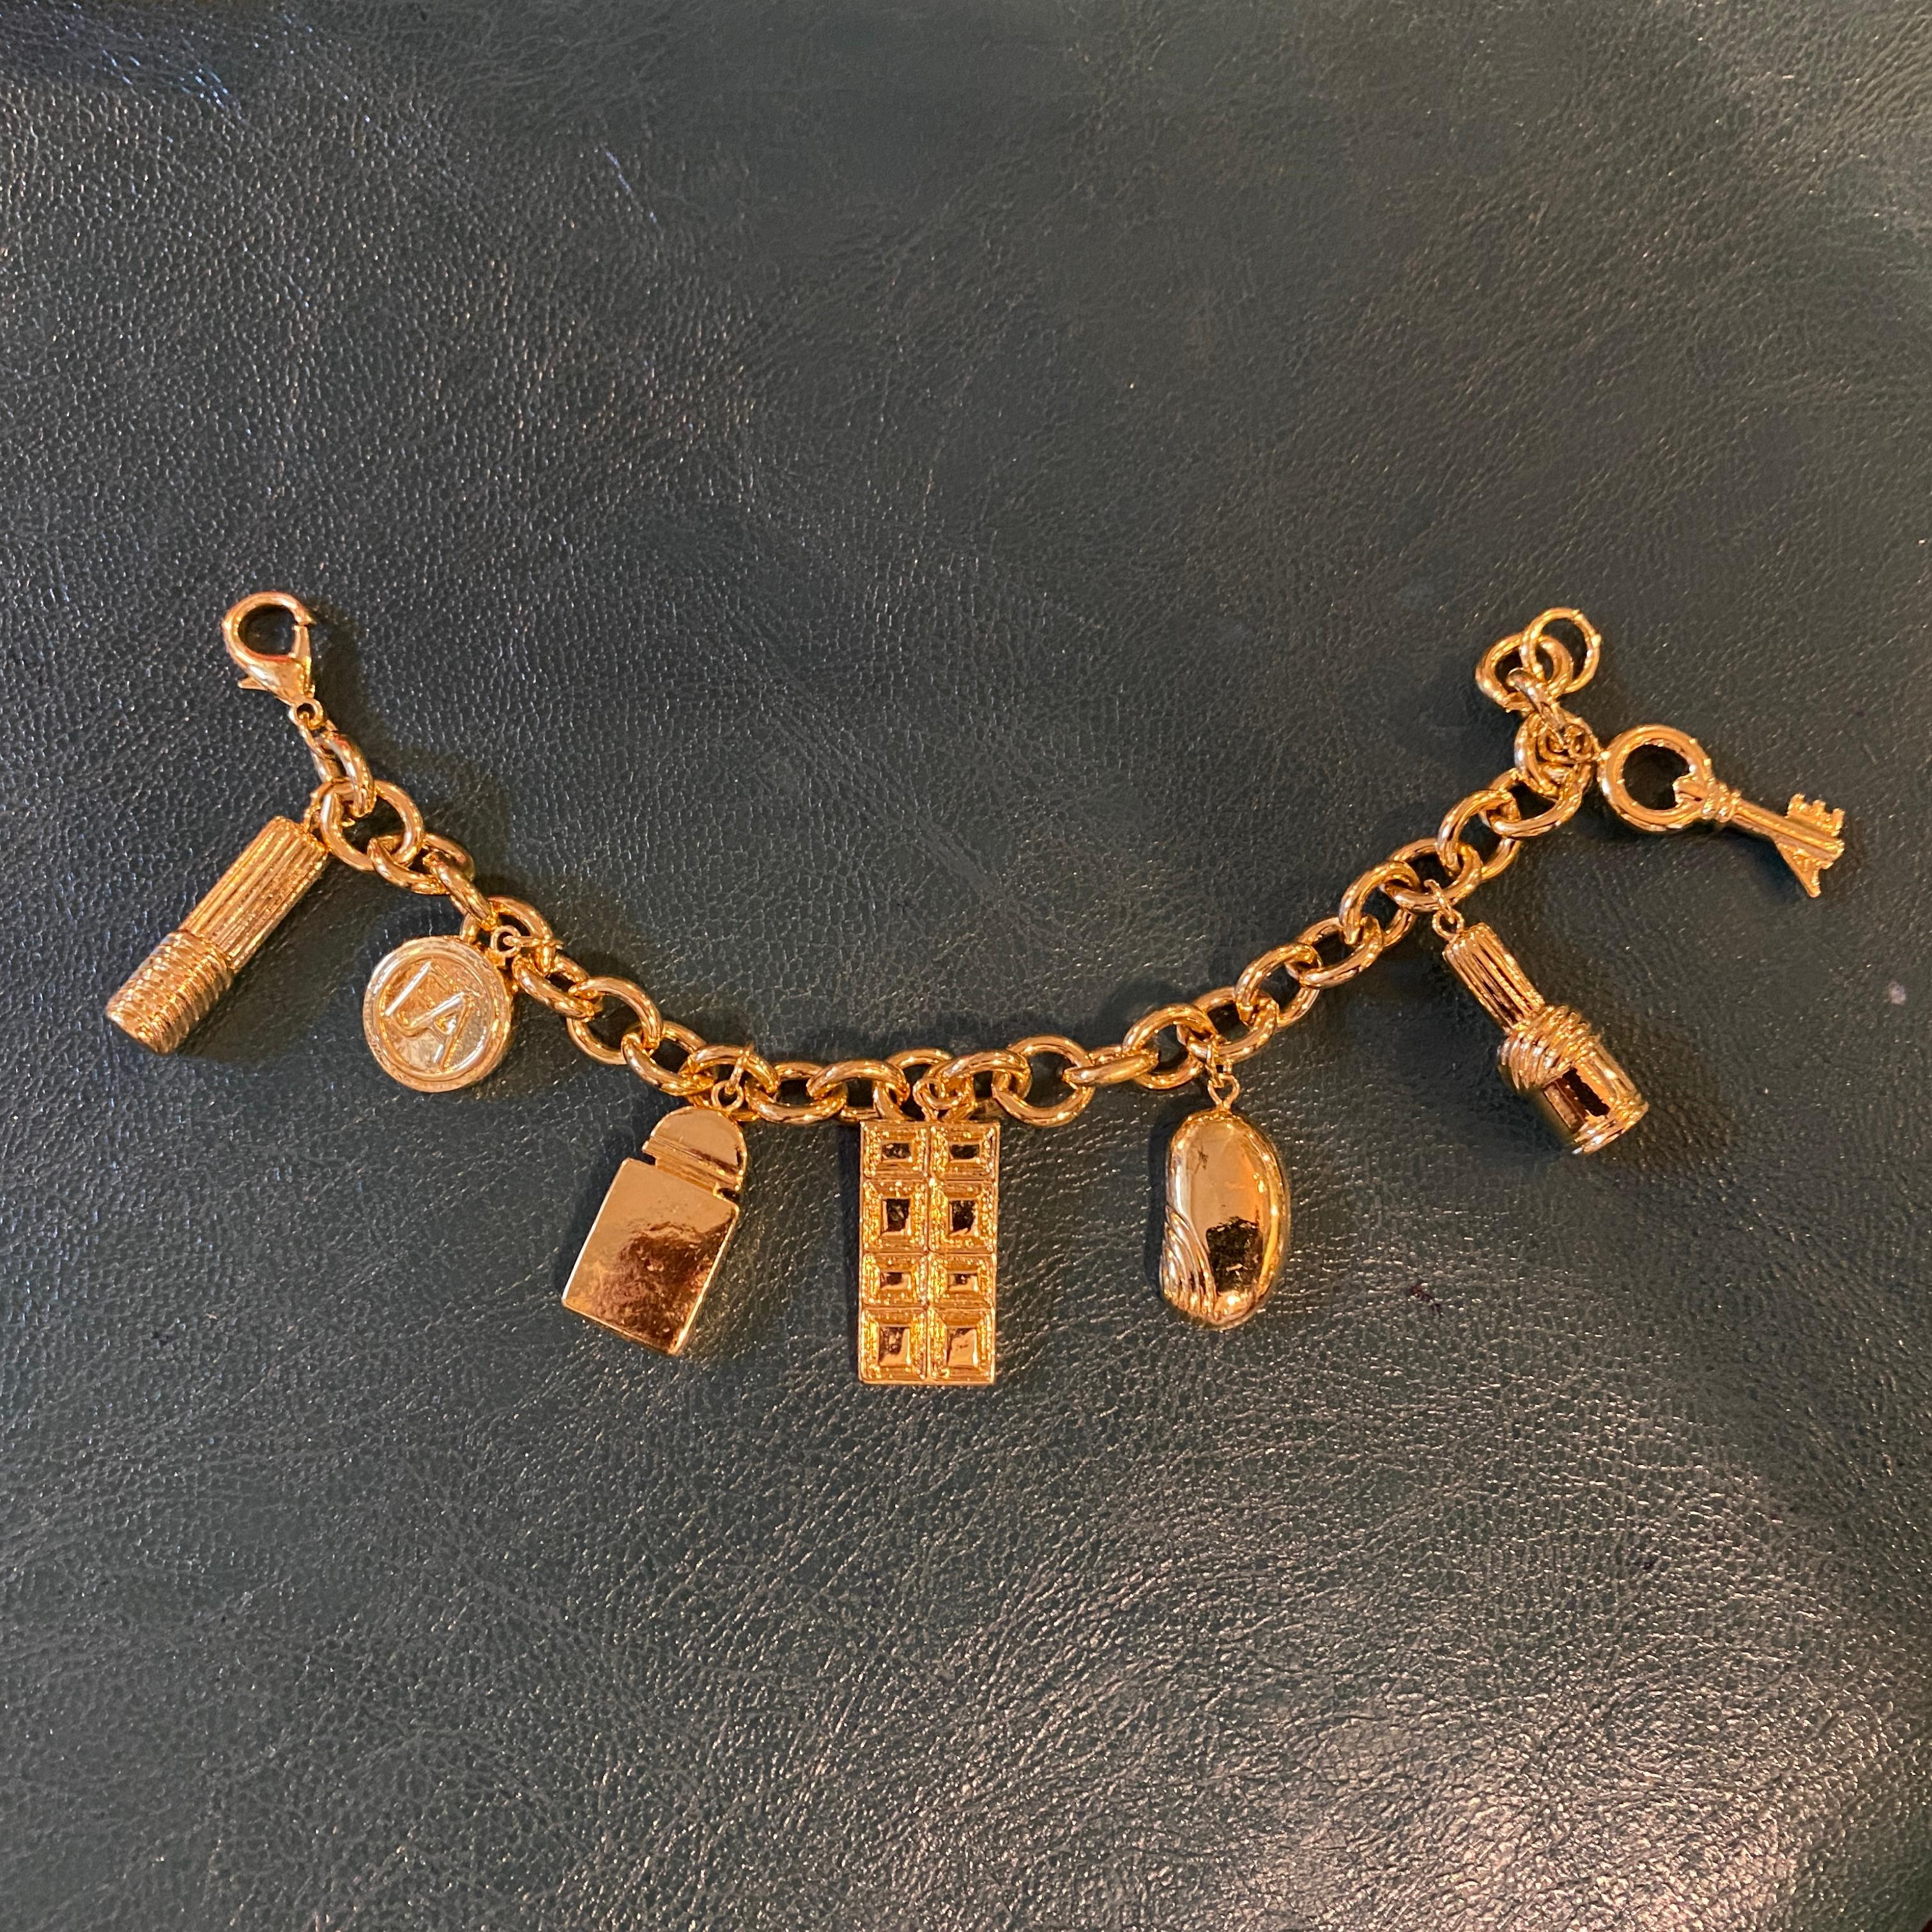 A never worn gold electroplated charm bracelet made exclusively for Elizabeth Arden, complete with box. 